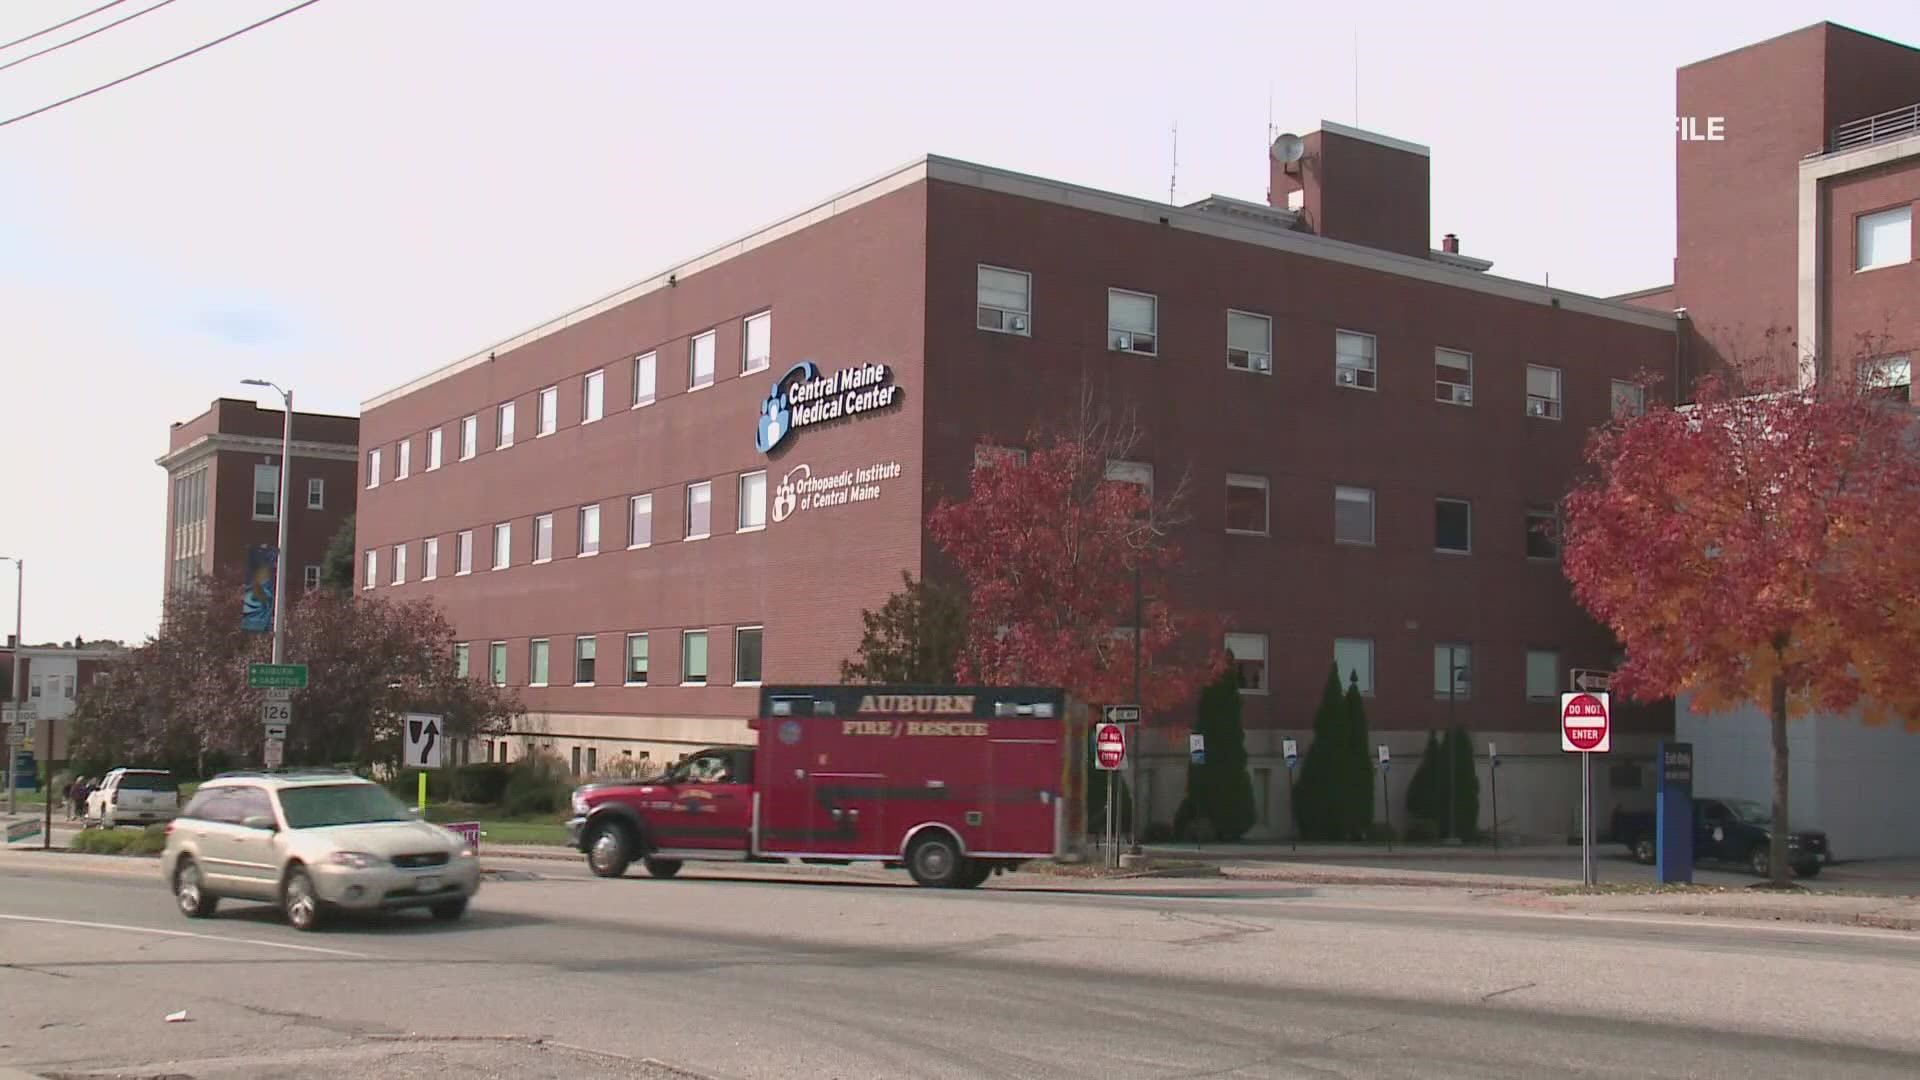 In a 10-9 vote, the state's Trauma Advisory Committee decided to allow some trauma care to return to Central Maine Medical Center.